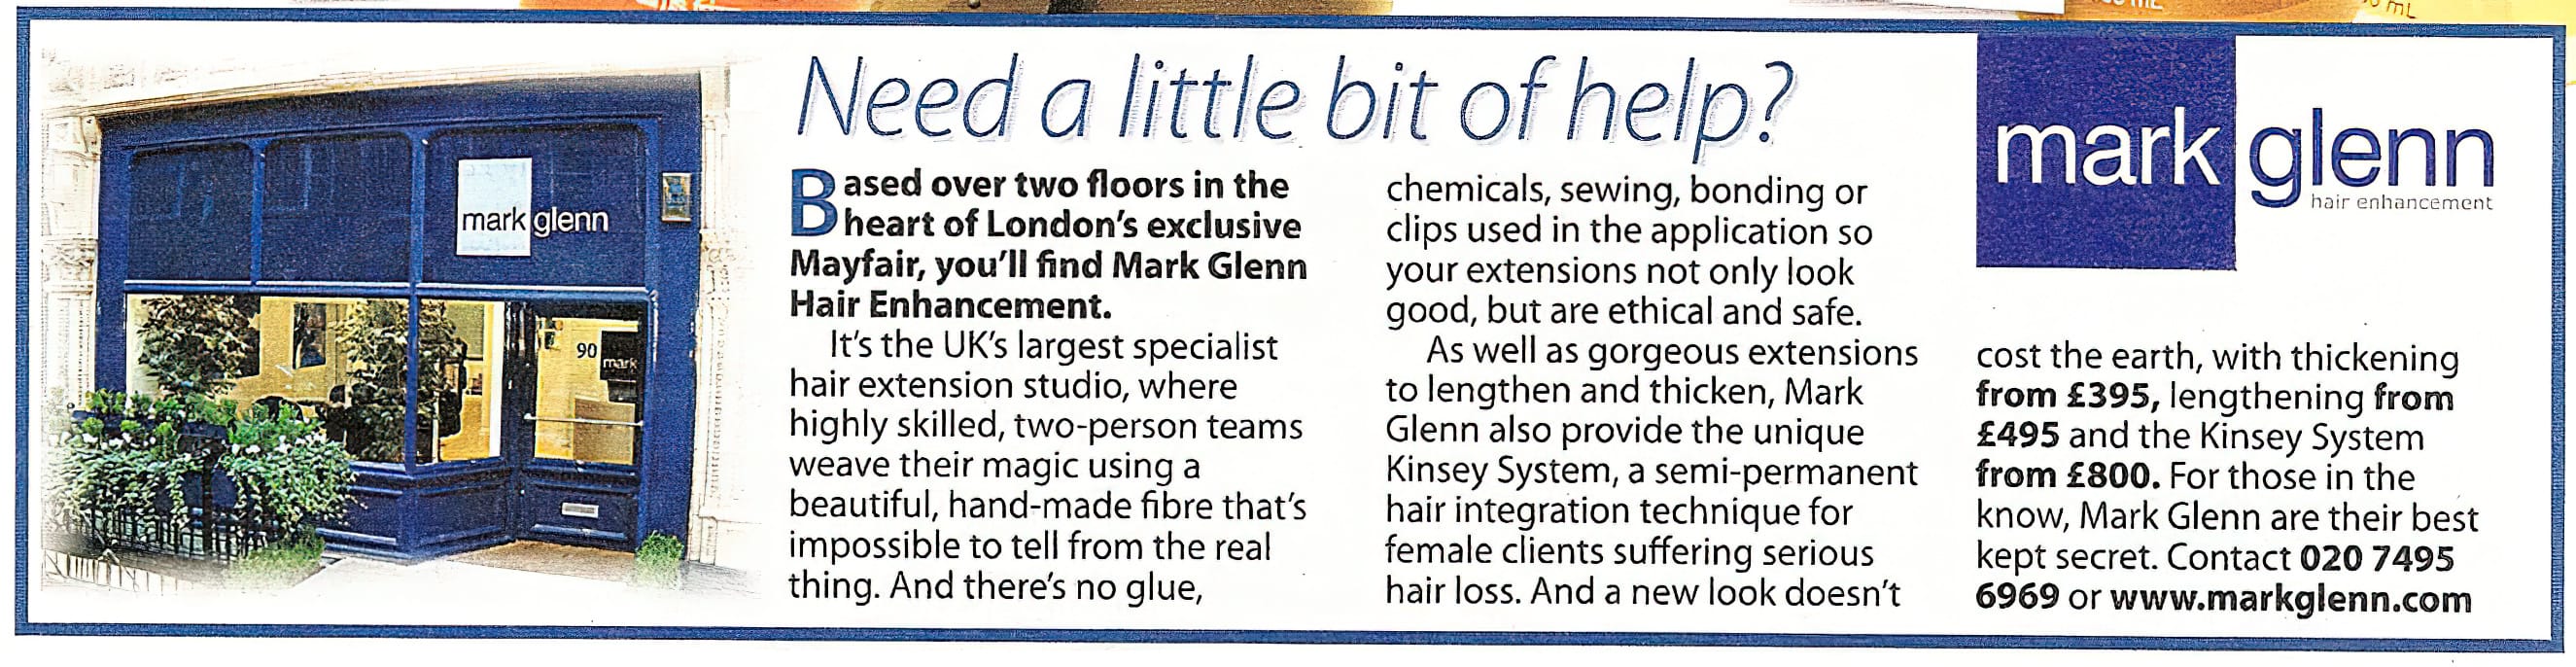 Take It Easy Magazine, The People - 'Need a little hair extension help?' - Mark Glenn review